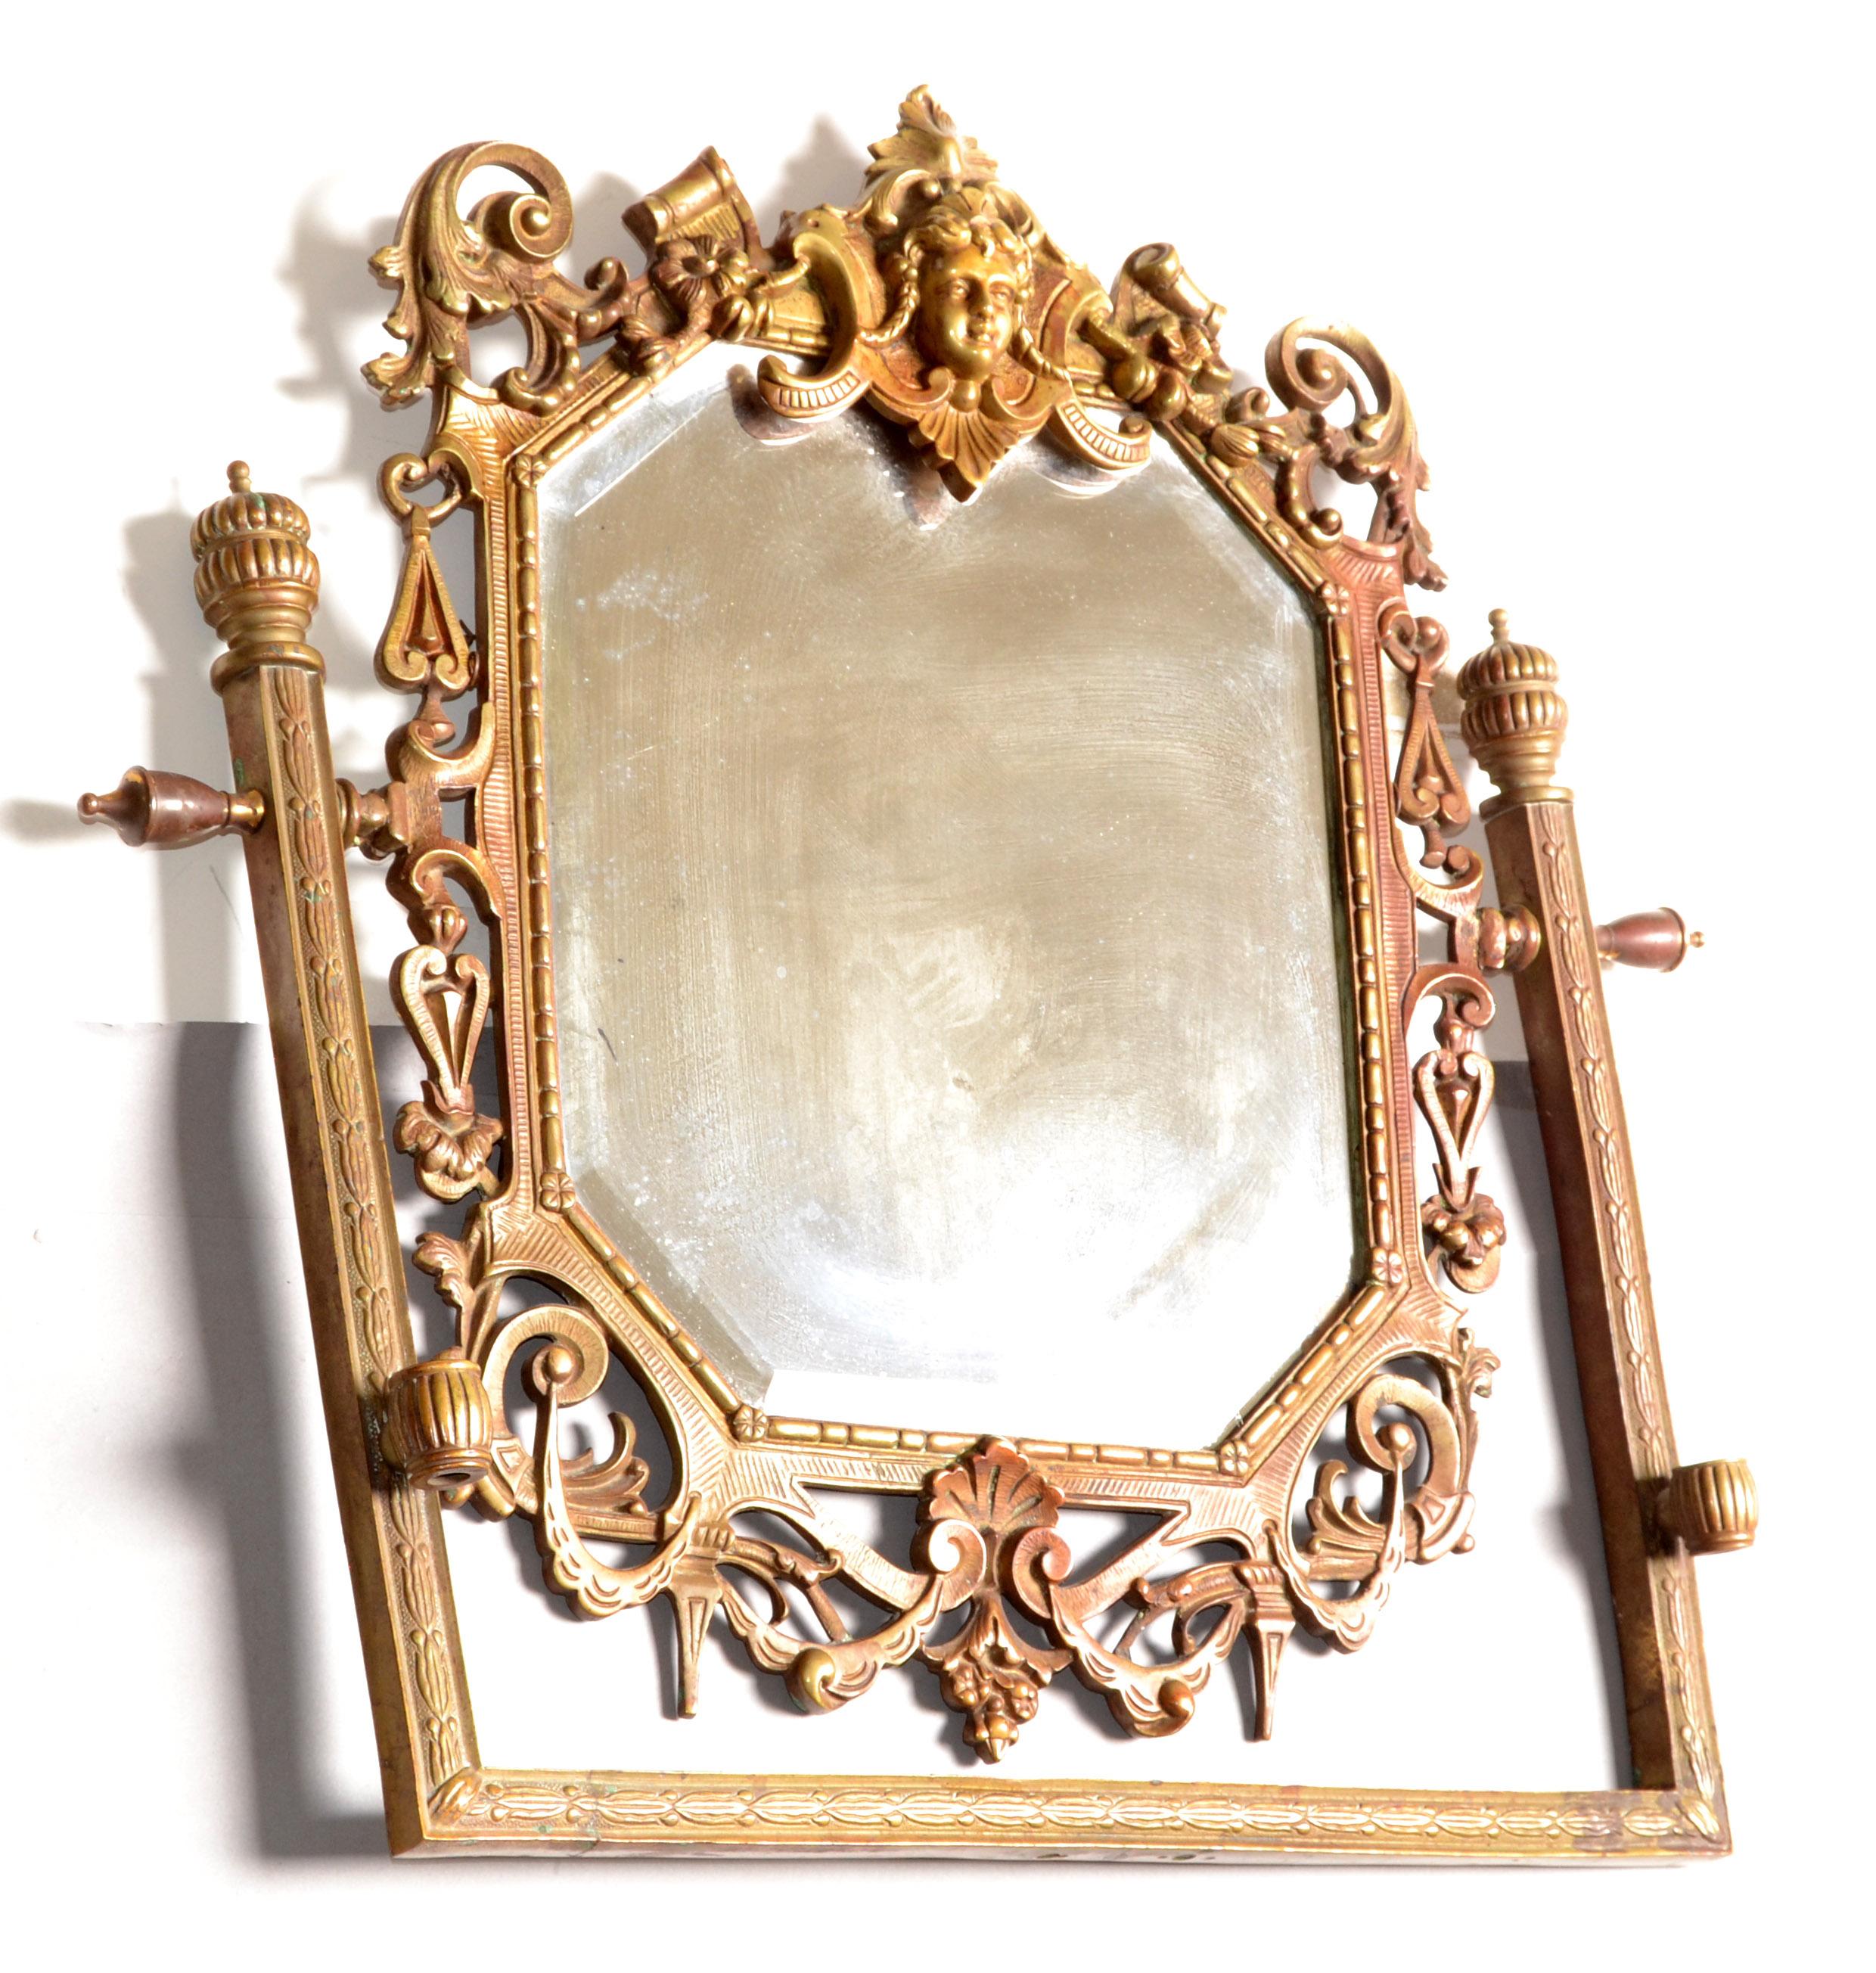 Late 19th Century 19th Century Ornate Sculpted Bronze Baroque Rectangle Beveled Wall Mirror For Sale